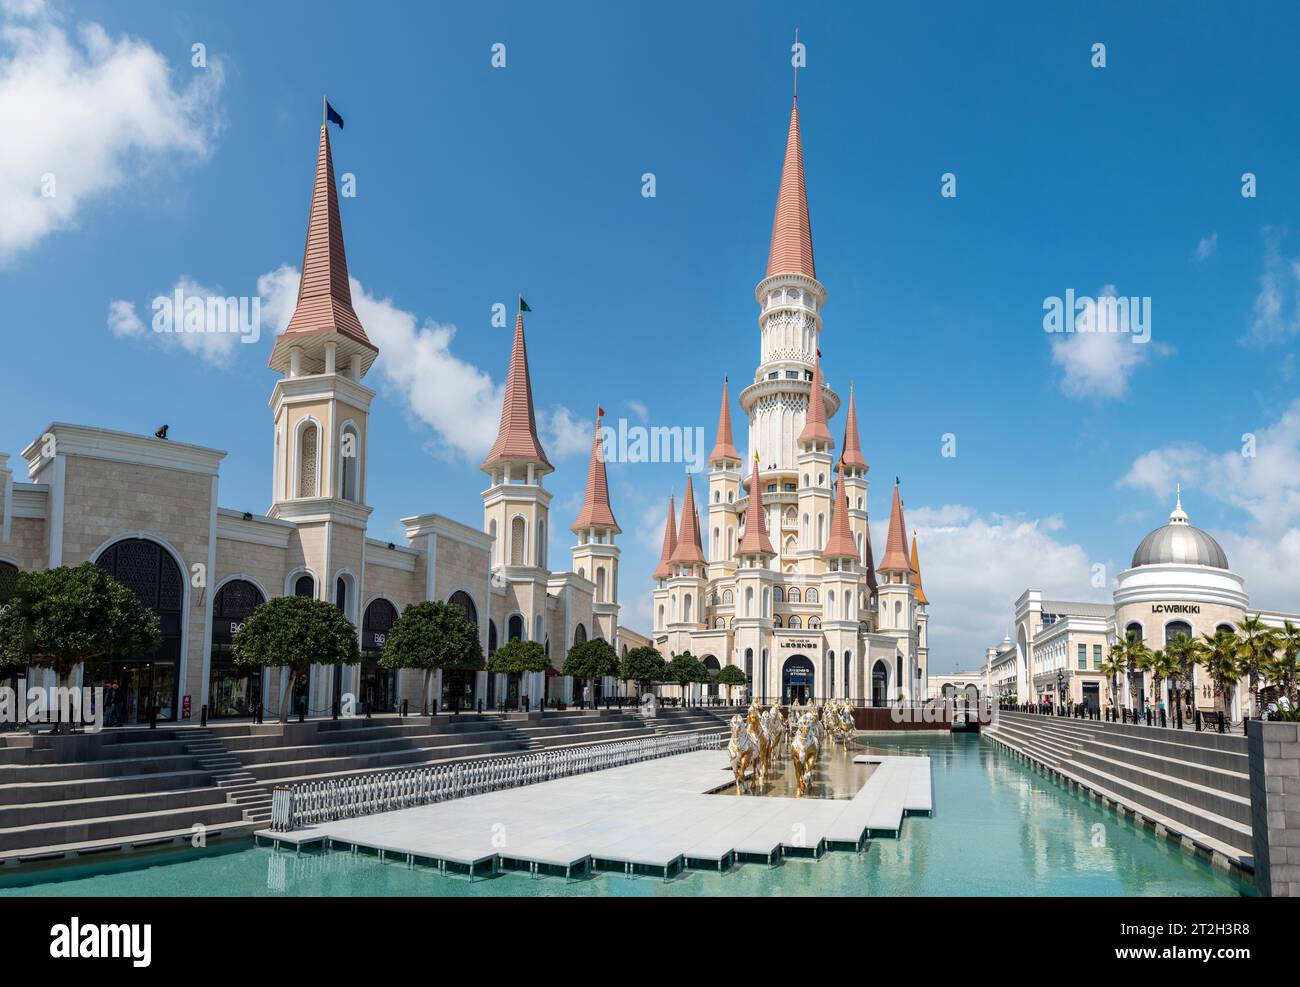 Belek, Antalya, Turkey - March 27, 2023. The Land of Legends theme park in Belek, Turkey. View toward the Chateau building, with a pool and chariot mo Stock Photo